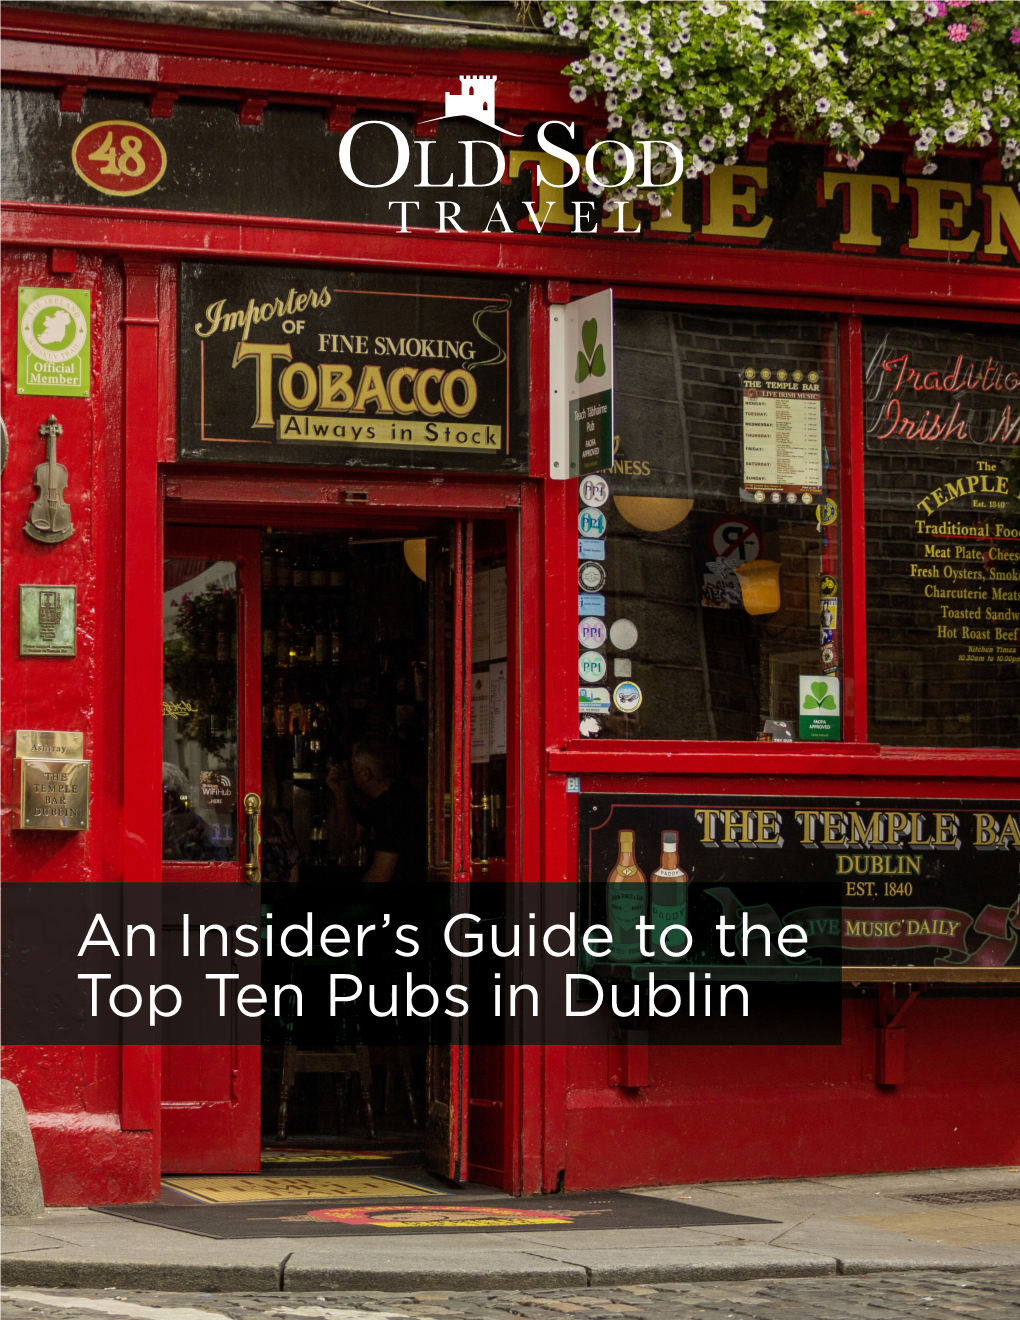 An Insider's Guide to the Top Ten Pubs in Dublin